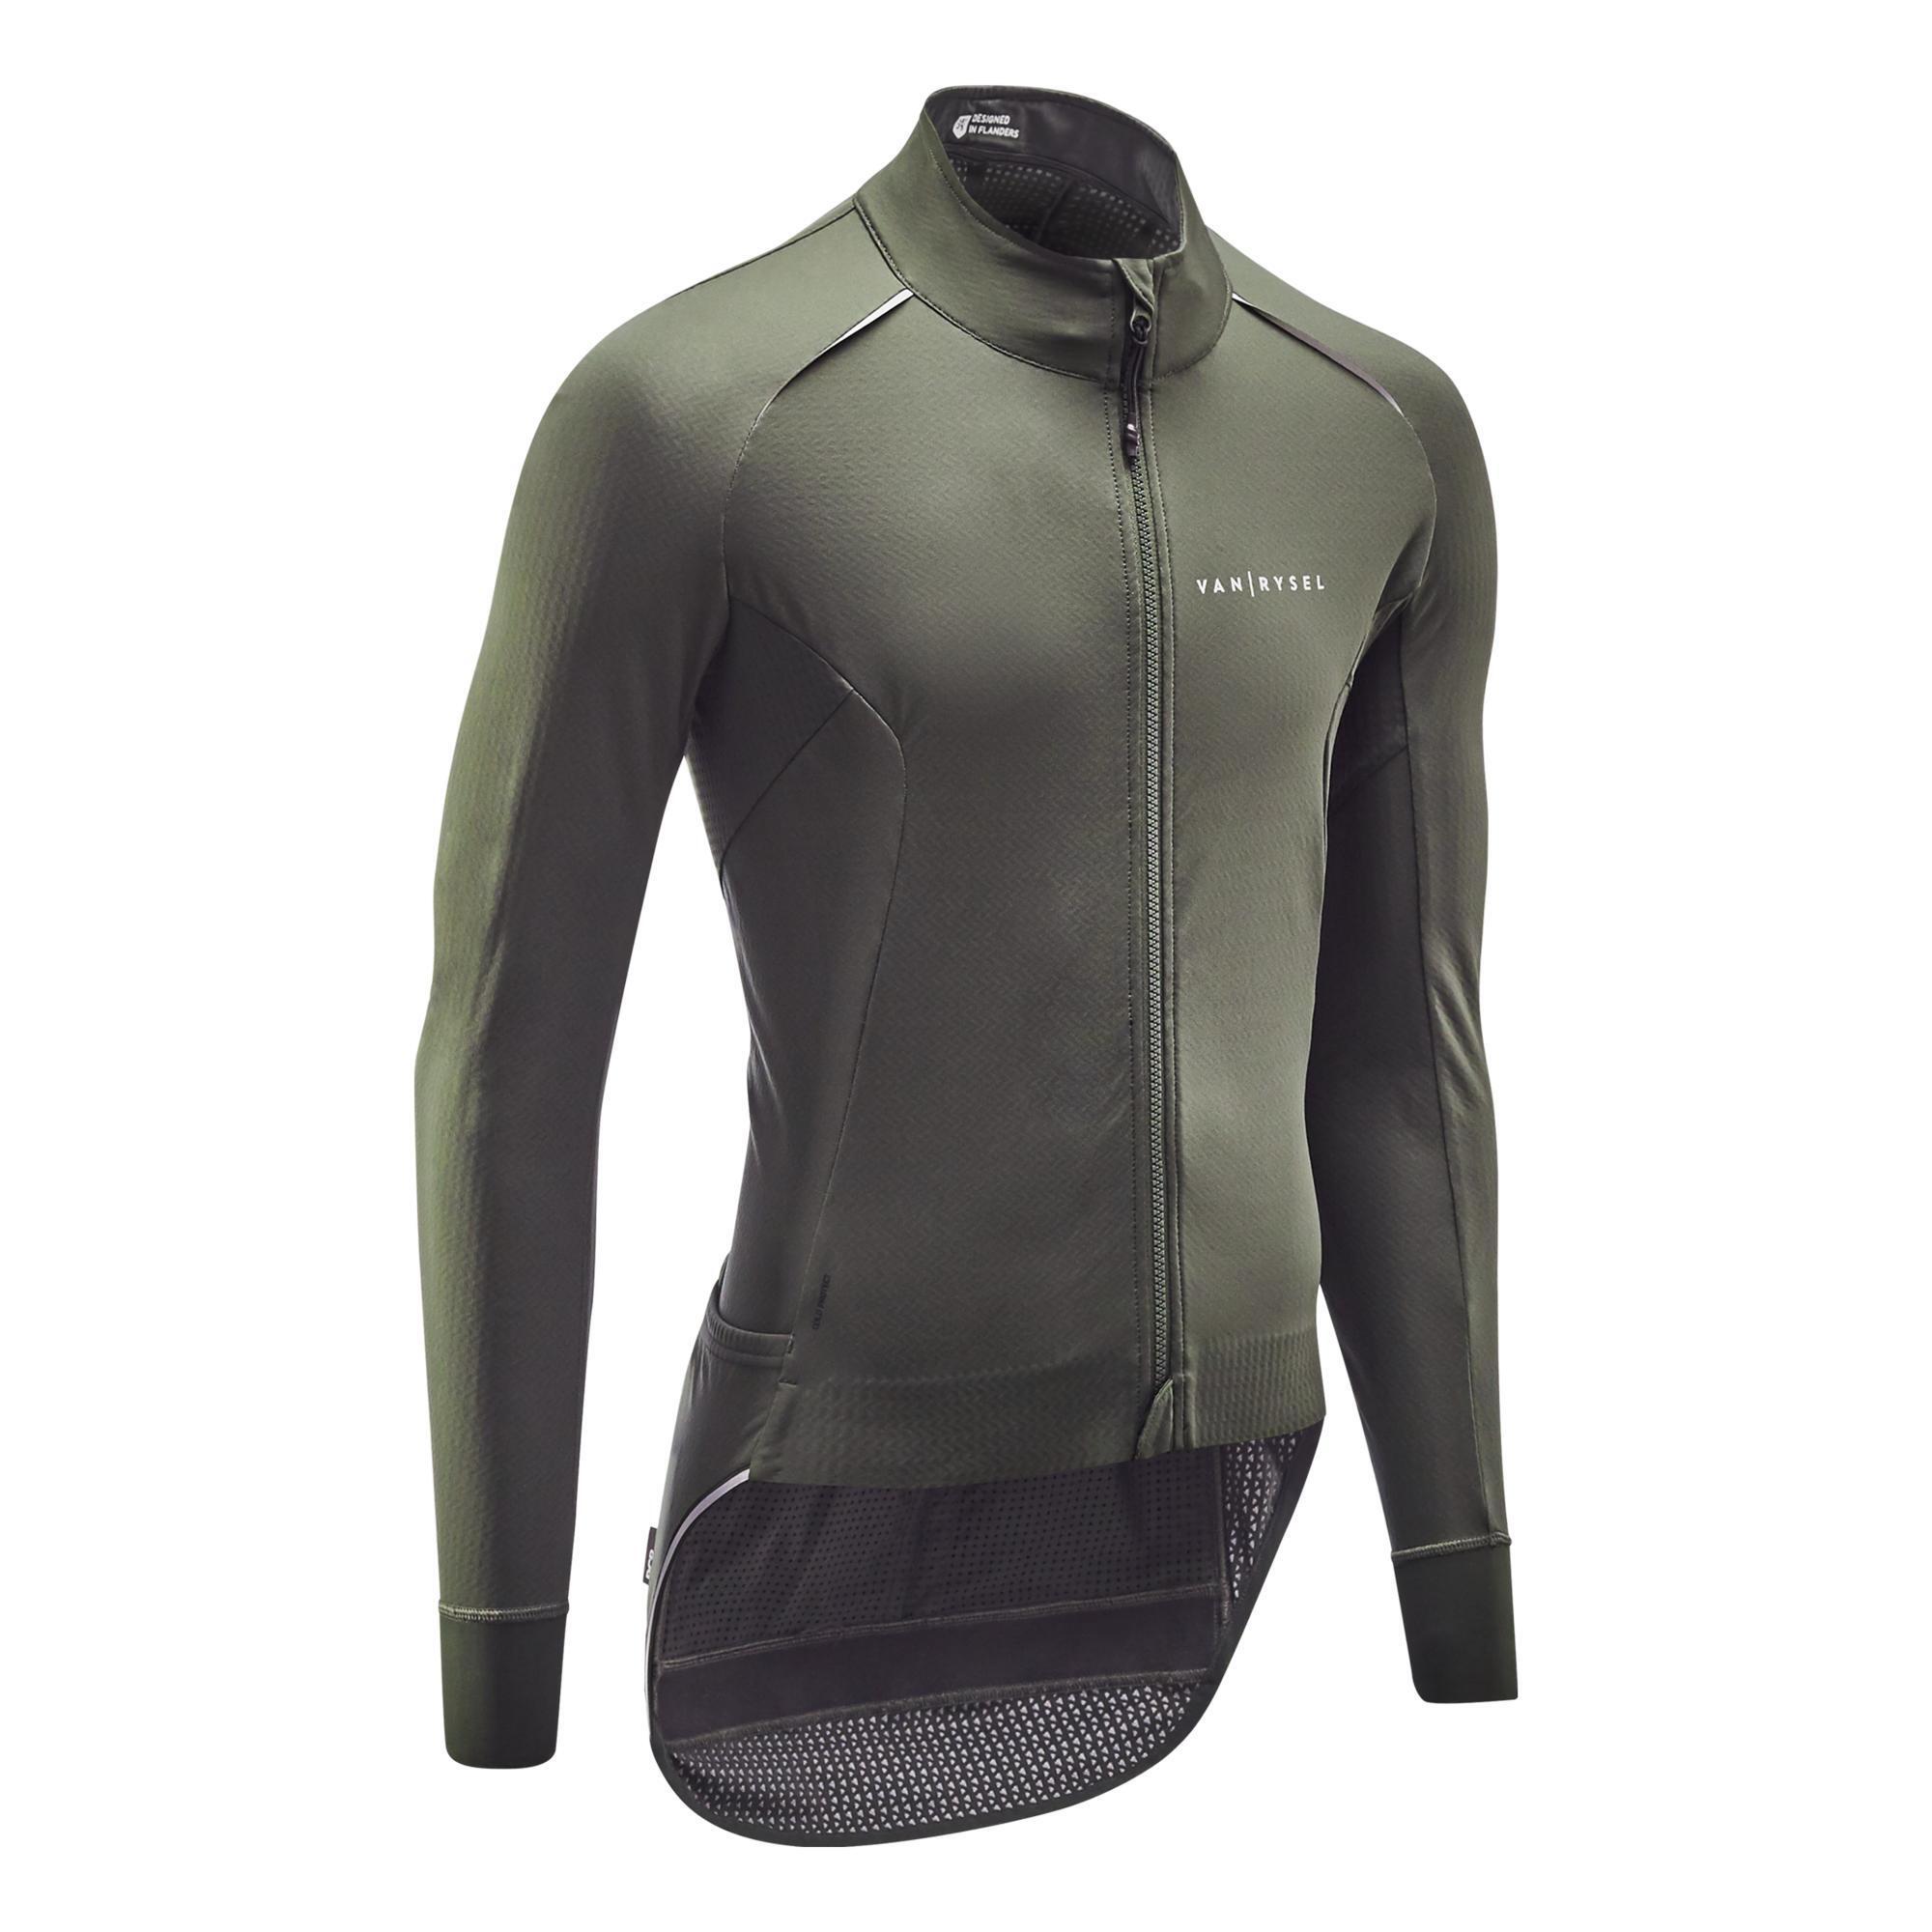 VAN RYSEL ROAD CYCLING WINTER JACKET RACER - Choice 4 Colours - FREE Click and Collect from Store - 365 Day Returns